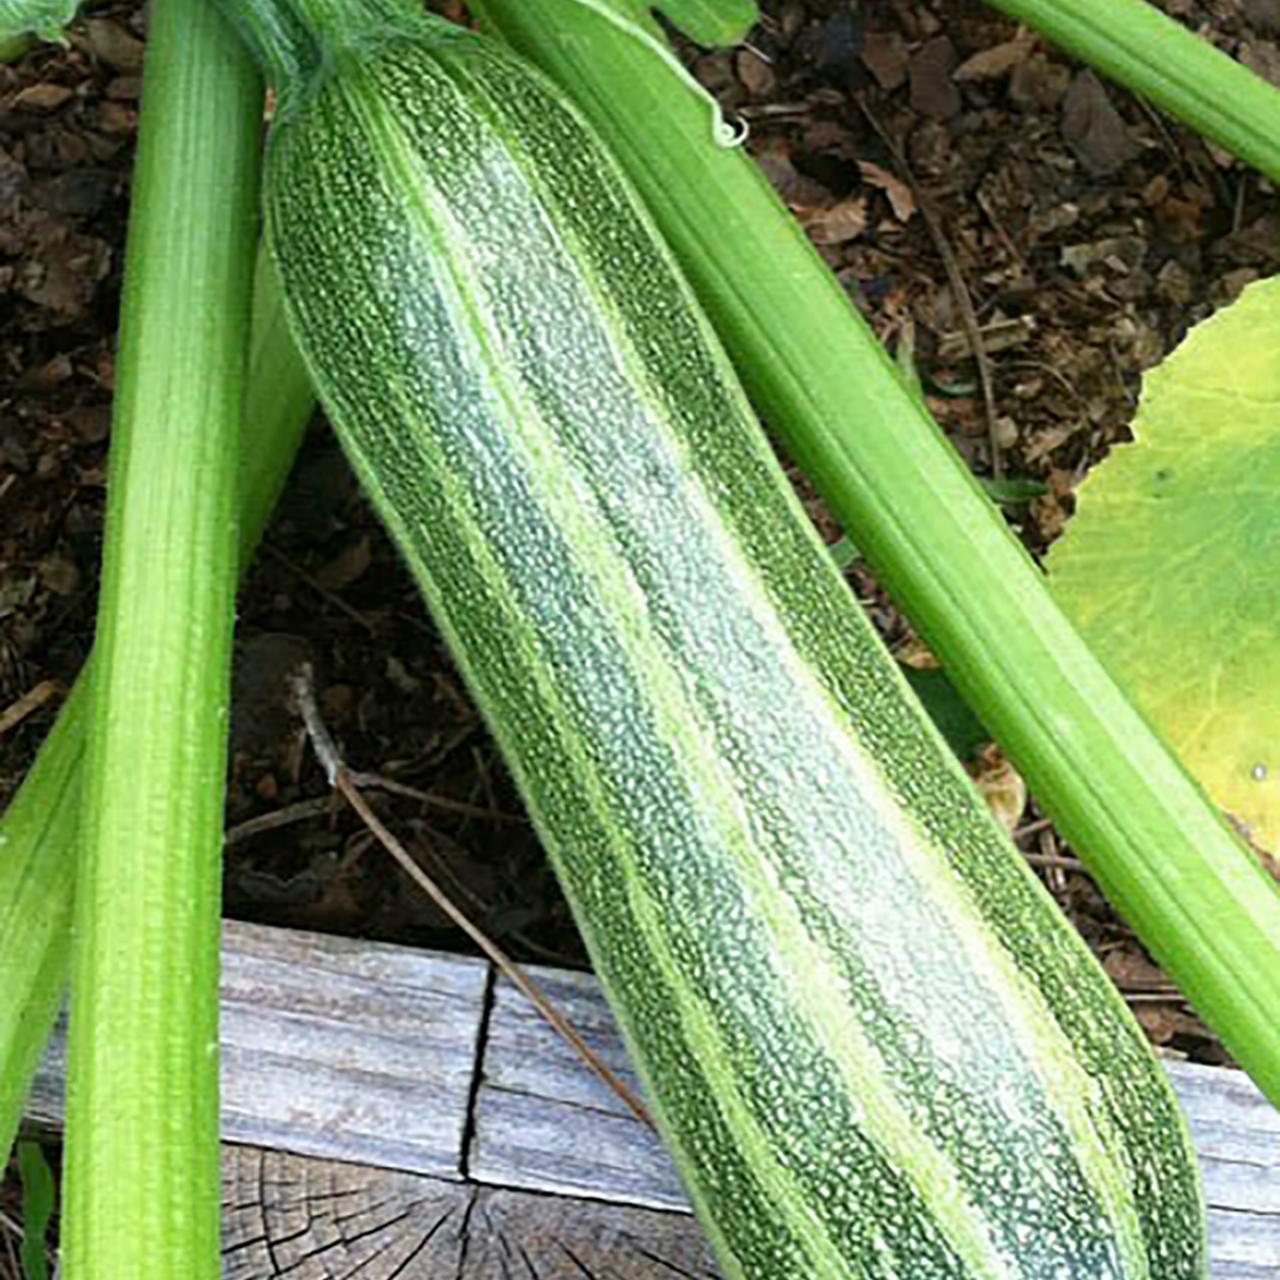 Courgettes: how to grow, care for and harvest